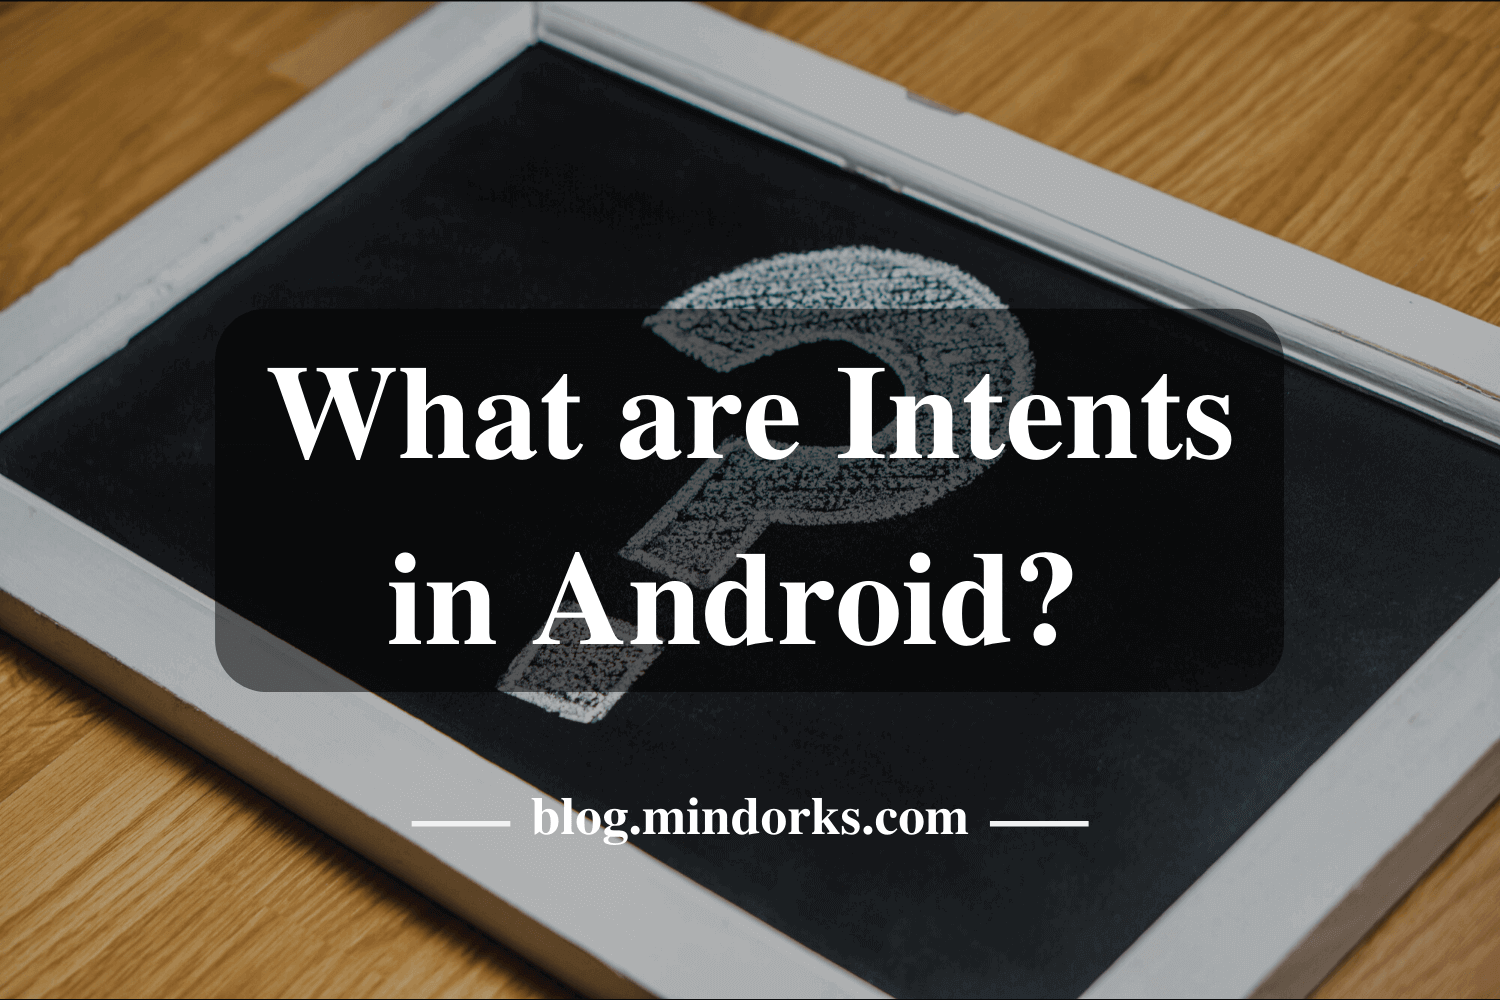 What are intents in Android?